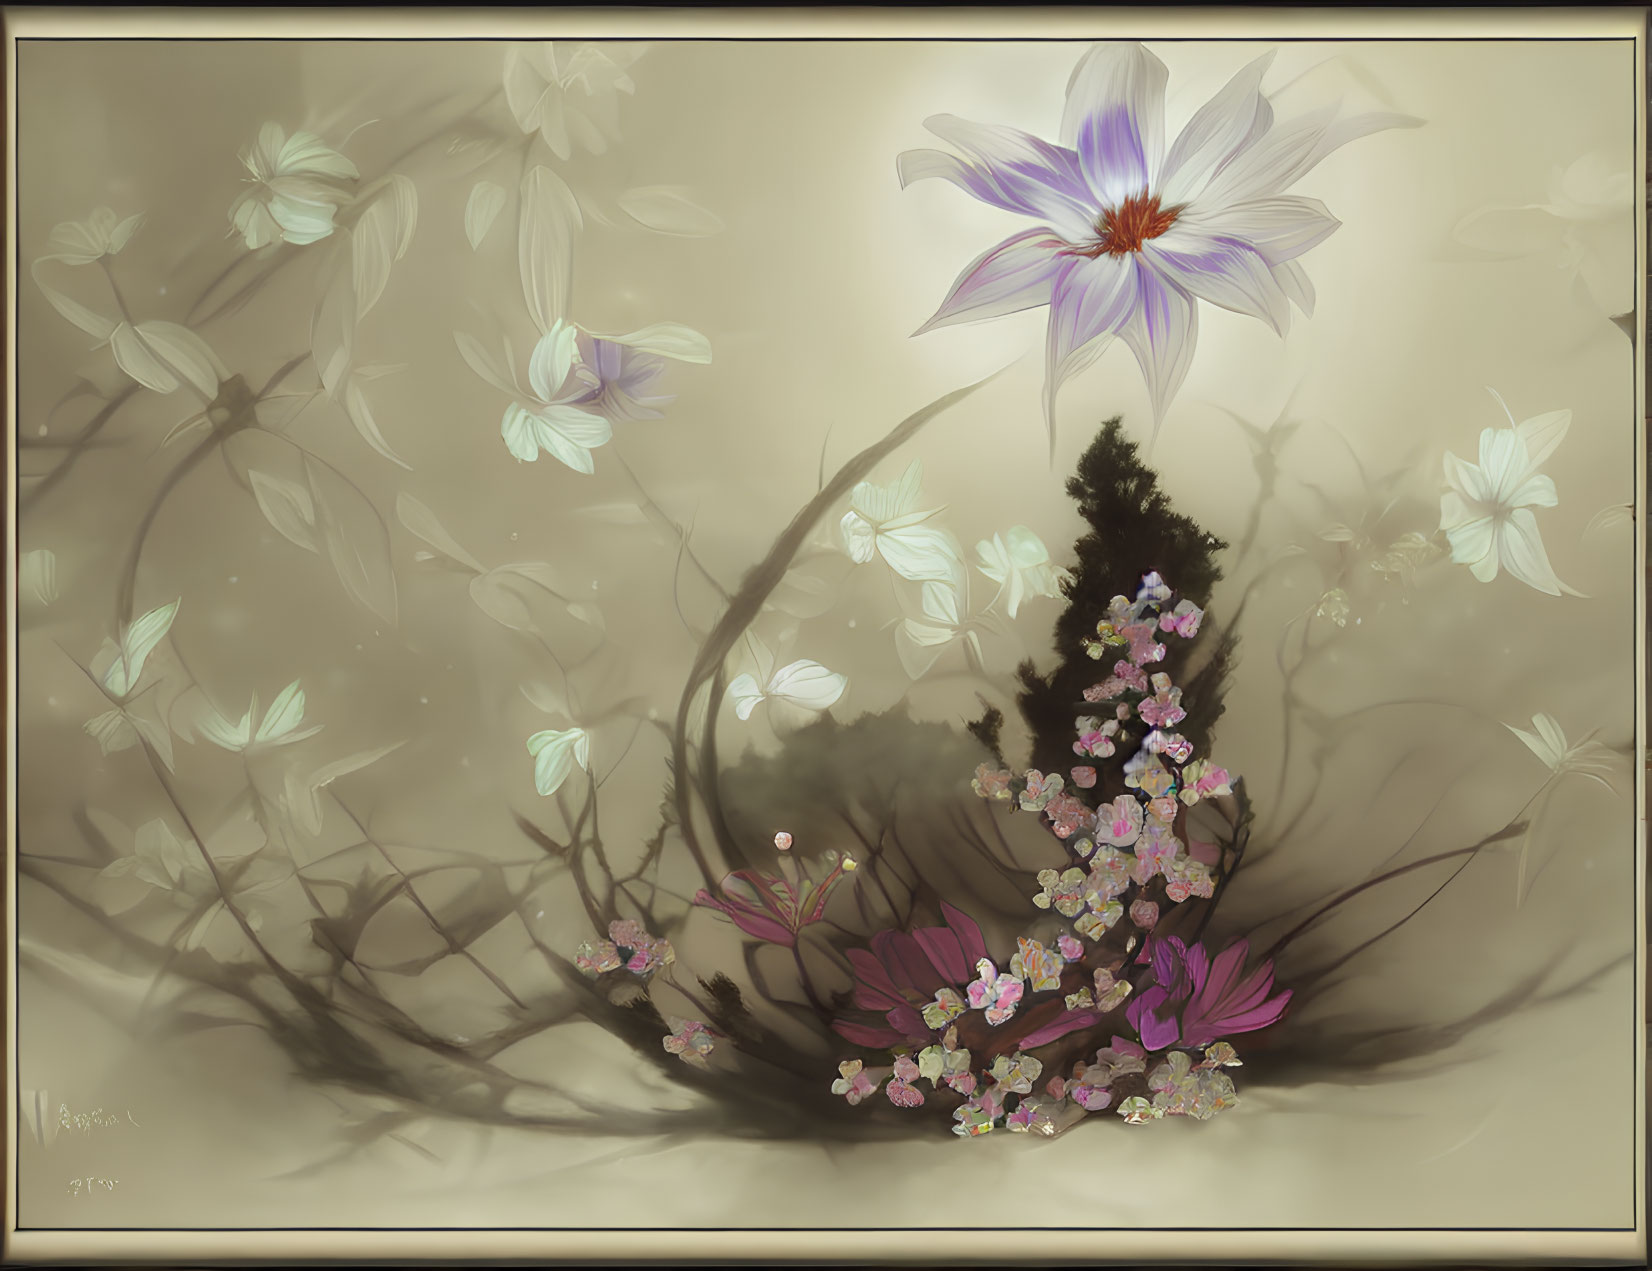 Sepia Toned Floral Artwork with Purple and White Bloom